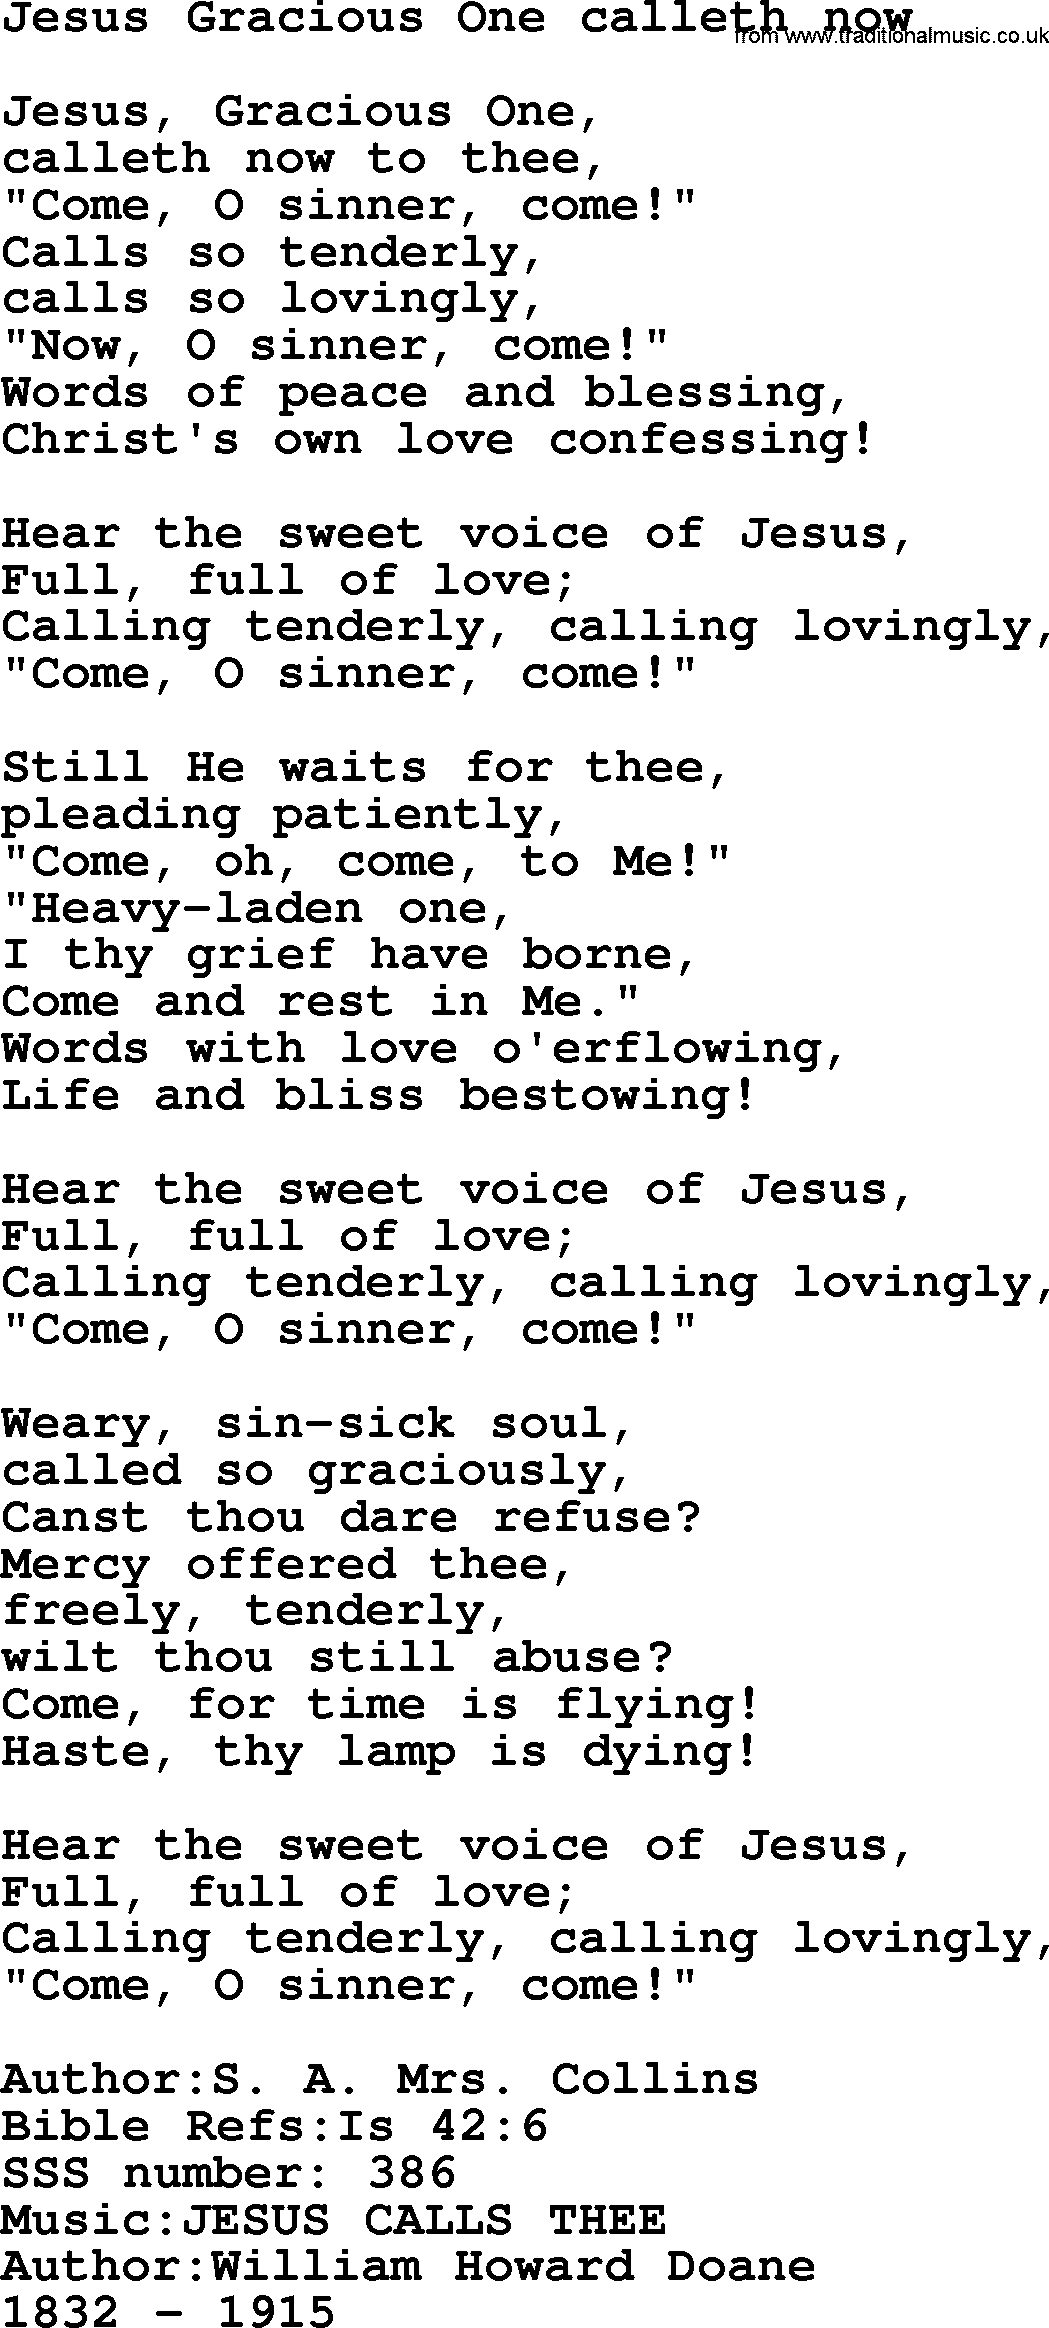 Sacred Songs and Solos complete, 1200 Hymns, title: Jesus Gracious One Calleth Now, lyrics and PDF